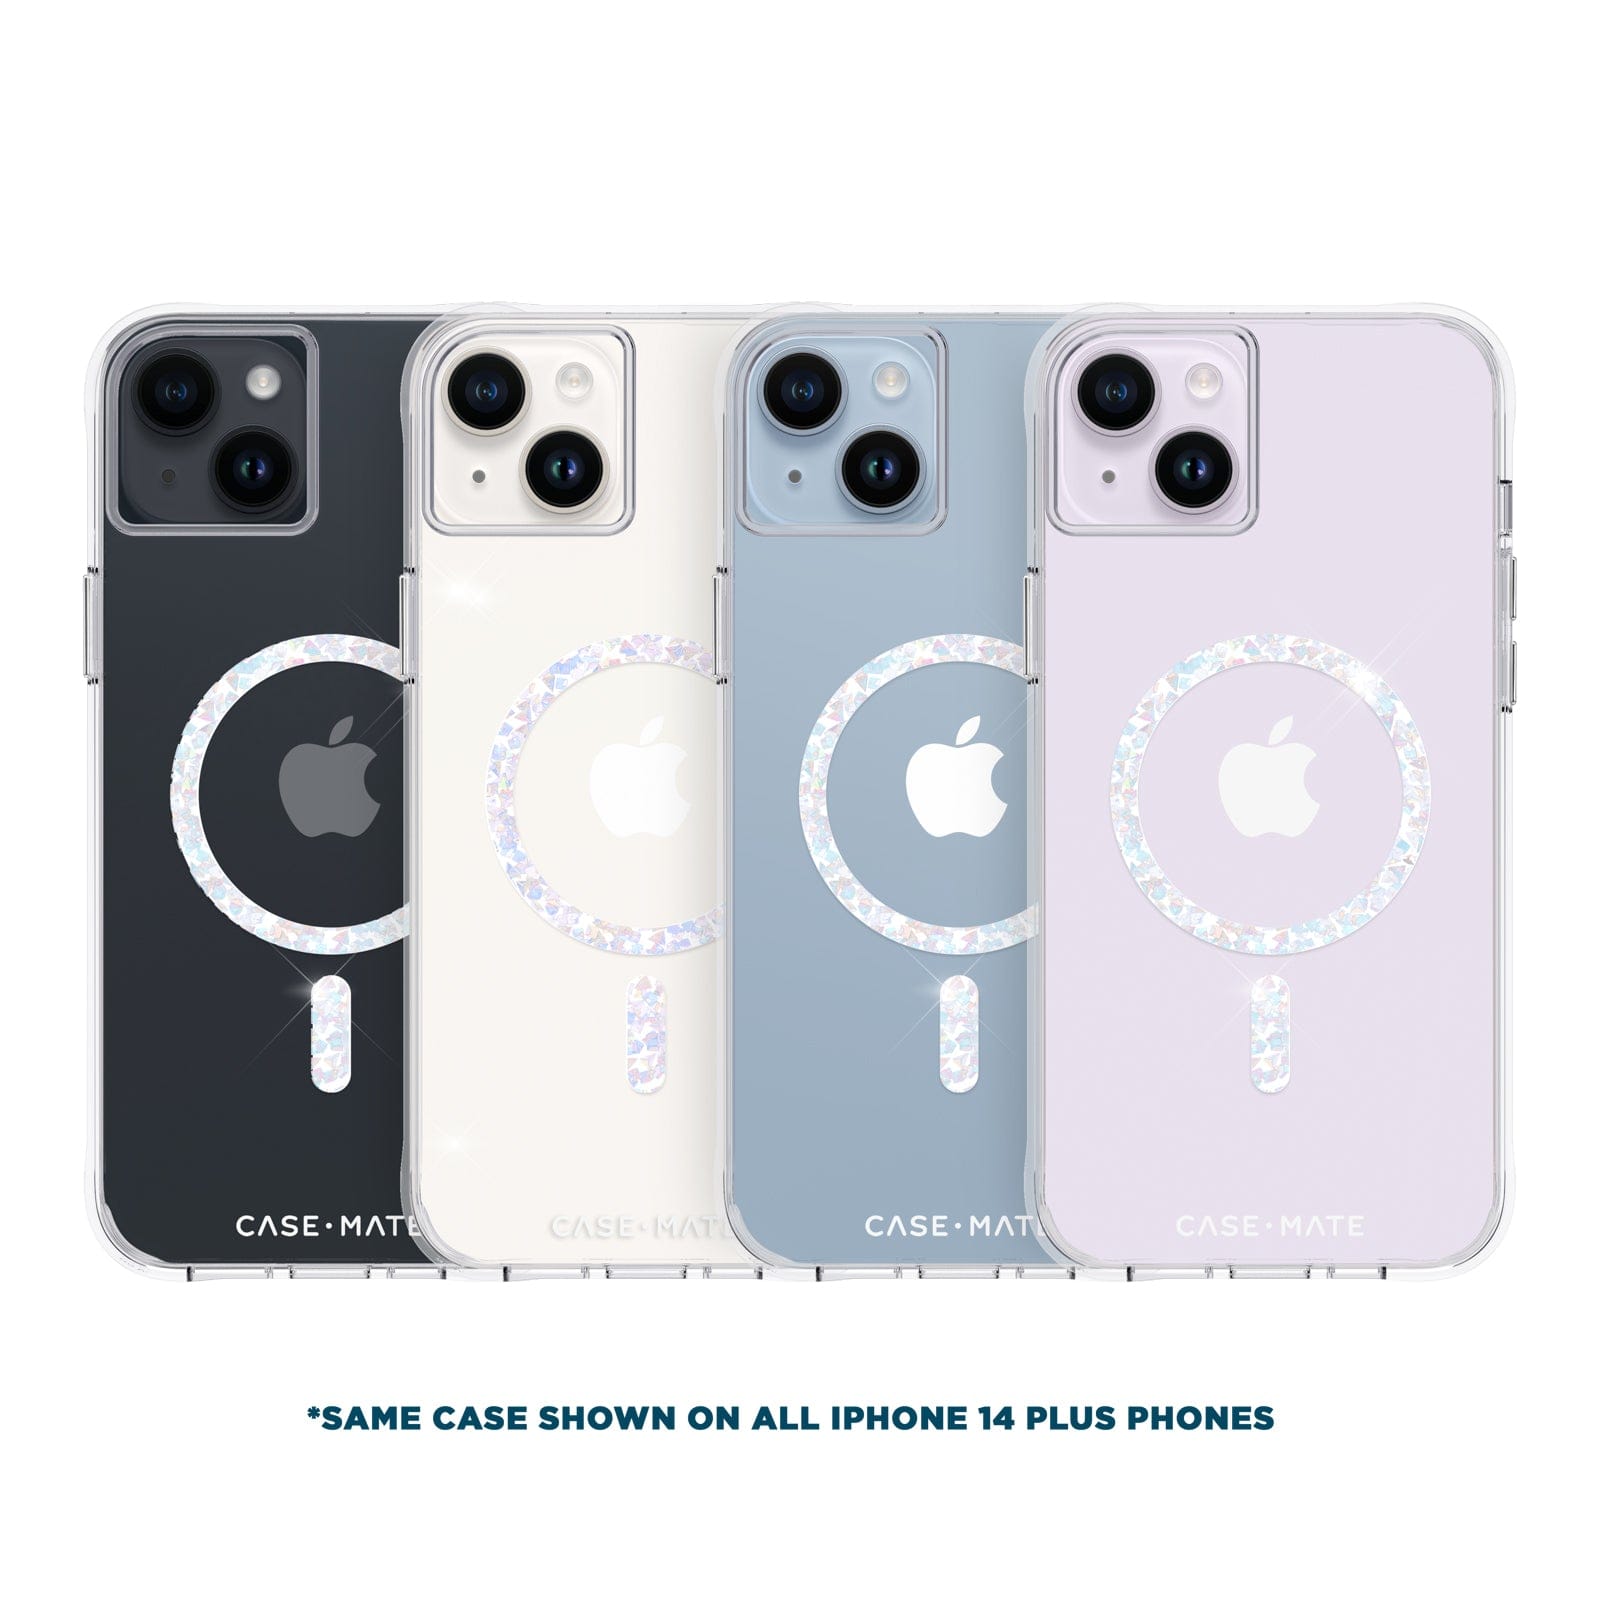 *SAME CASE SHOWN ON ALL IPHONE 14 PLUS PHONES